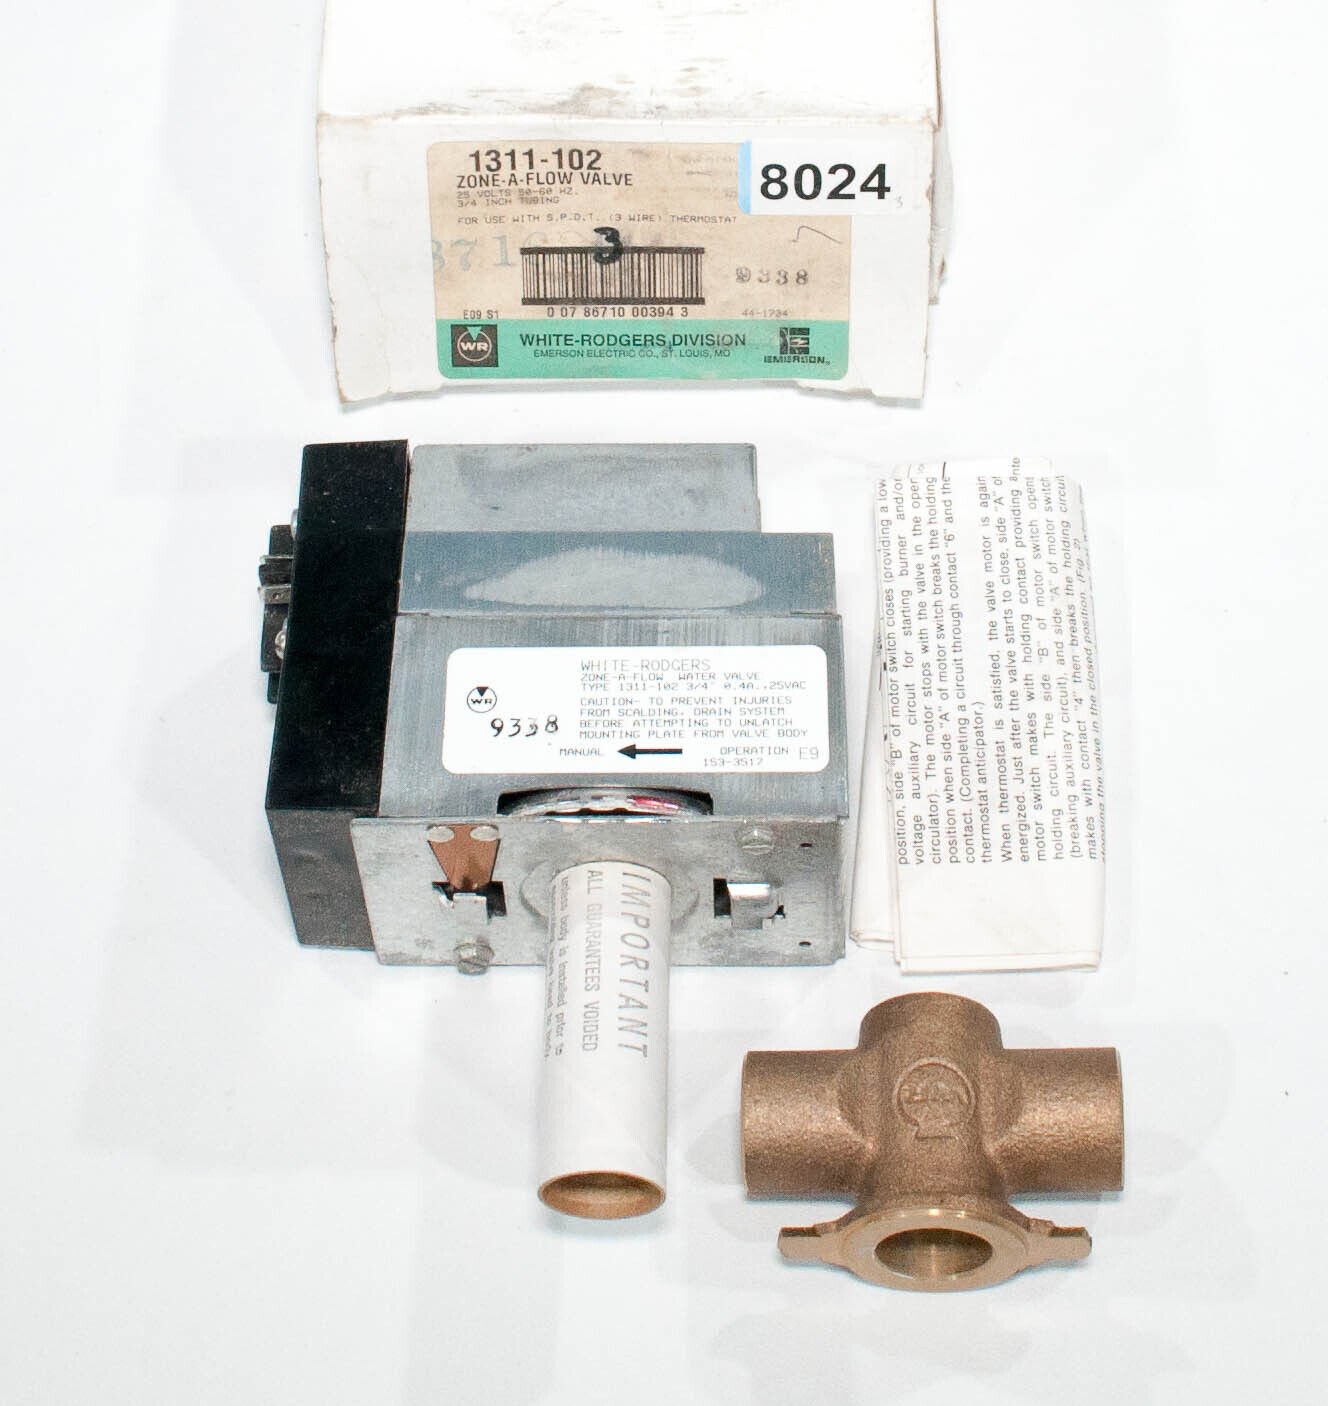 White Rodgers  1311-102  Zone-A-Flow Valve  3-Wire